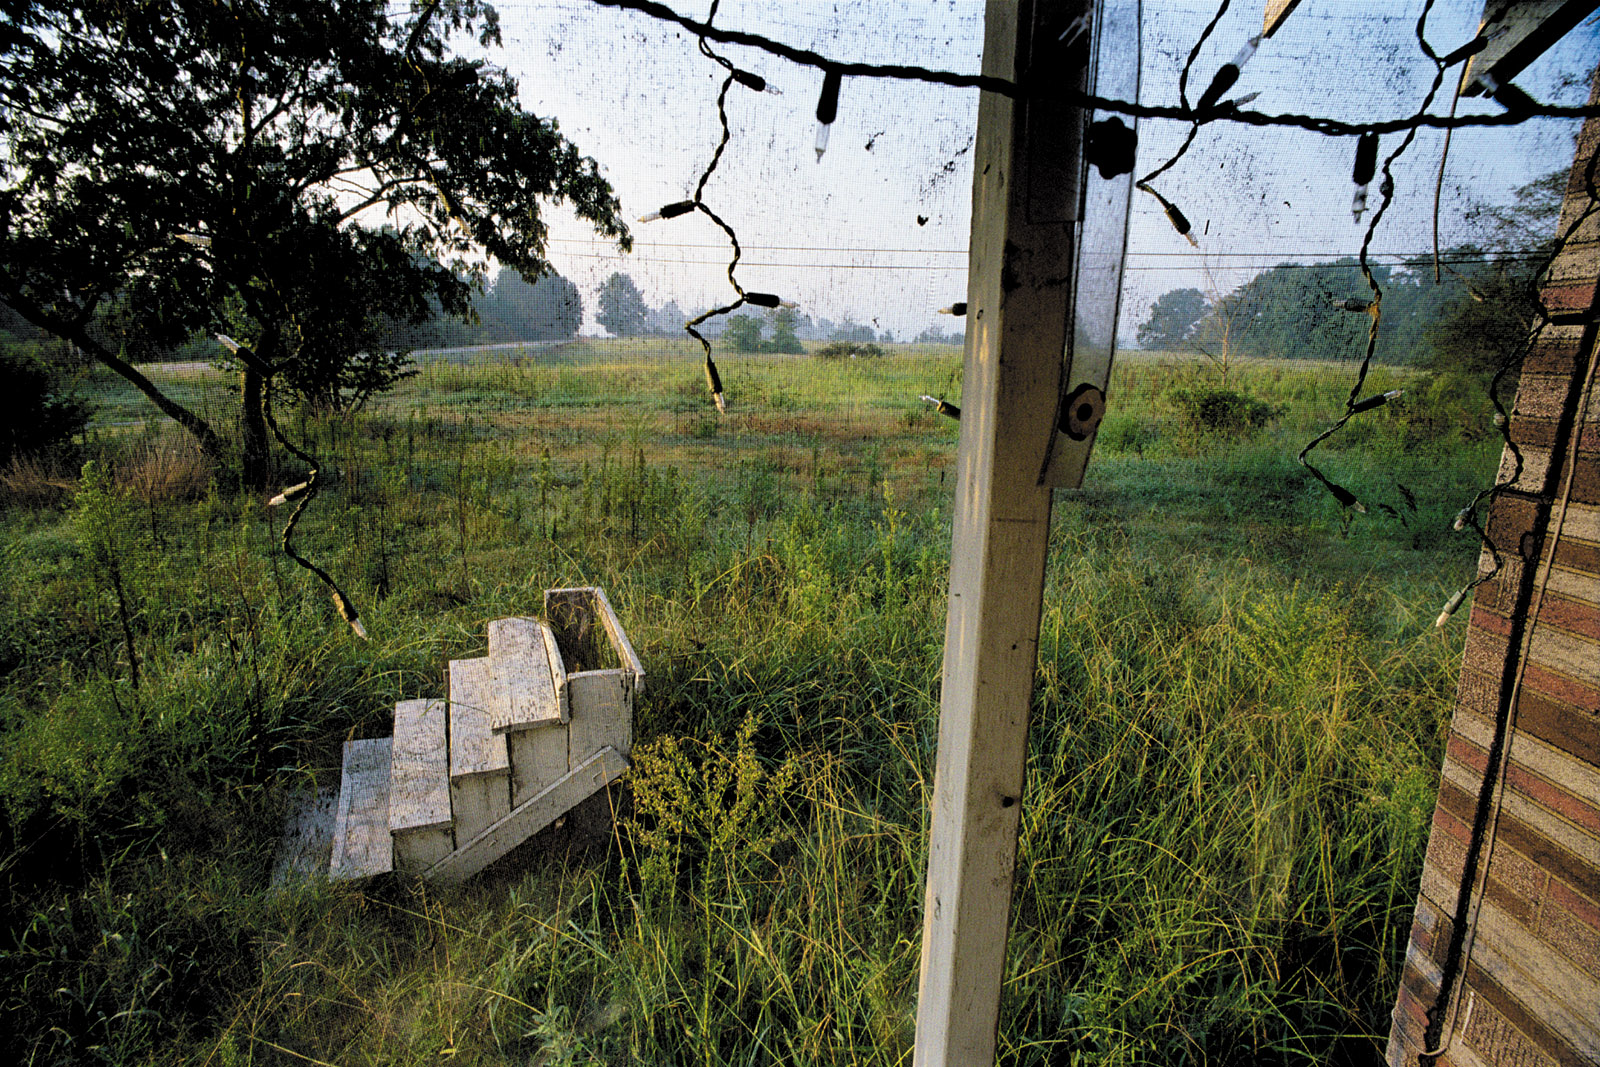 An abandoned farmhouse, 2005; photograph by Eugene Richards from The Run-On of Time, the catalog of a recent exhibition that originated at the George Eastman Museum and the Nelson-Atkins Museum of Art. It is distributed by Yale University Press.